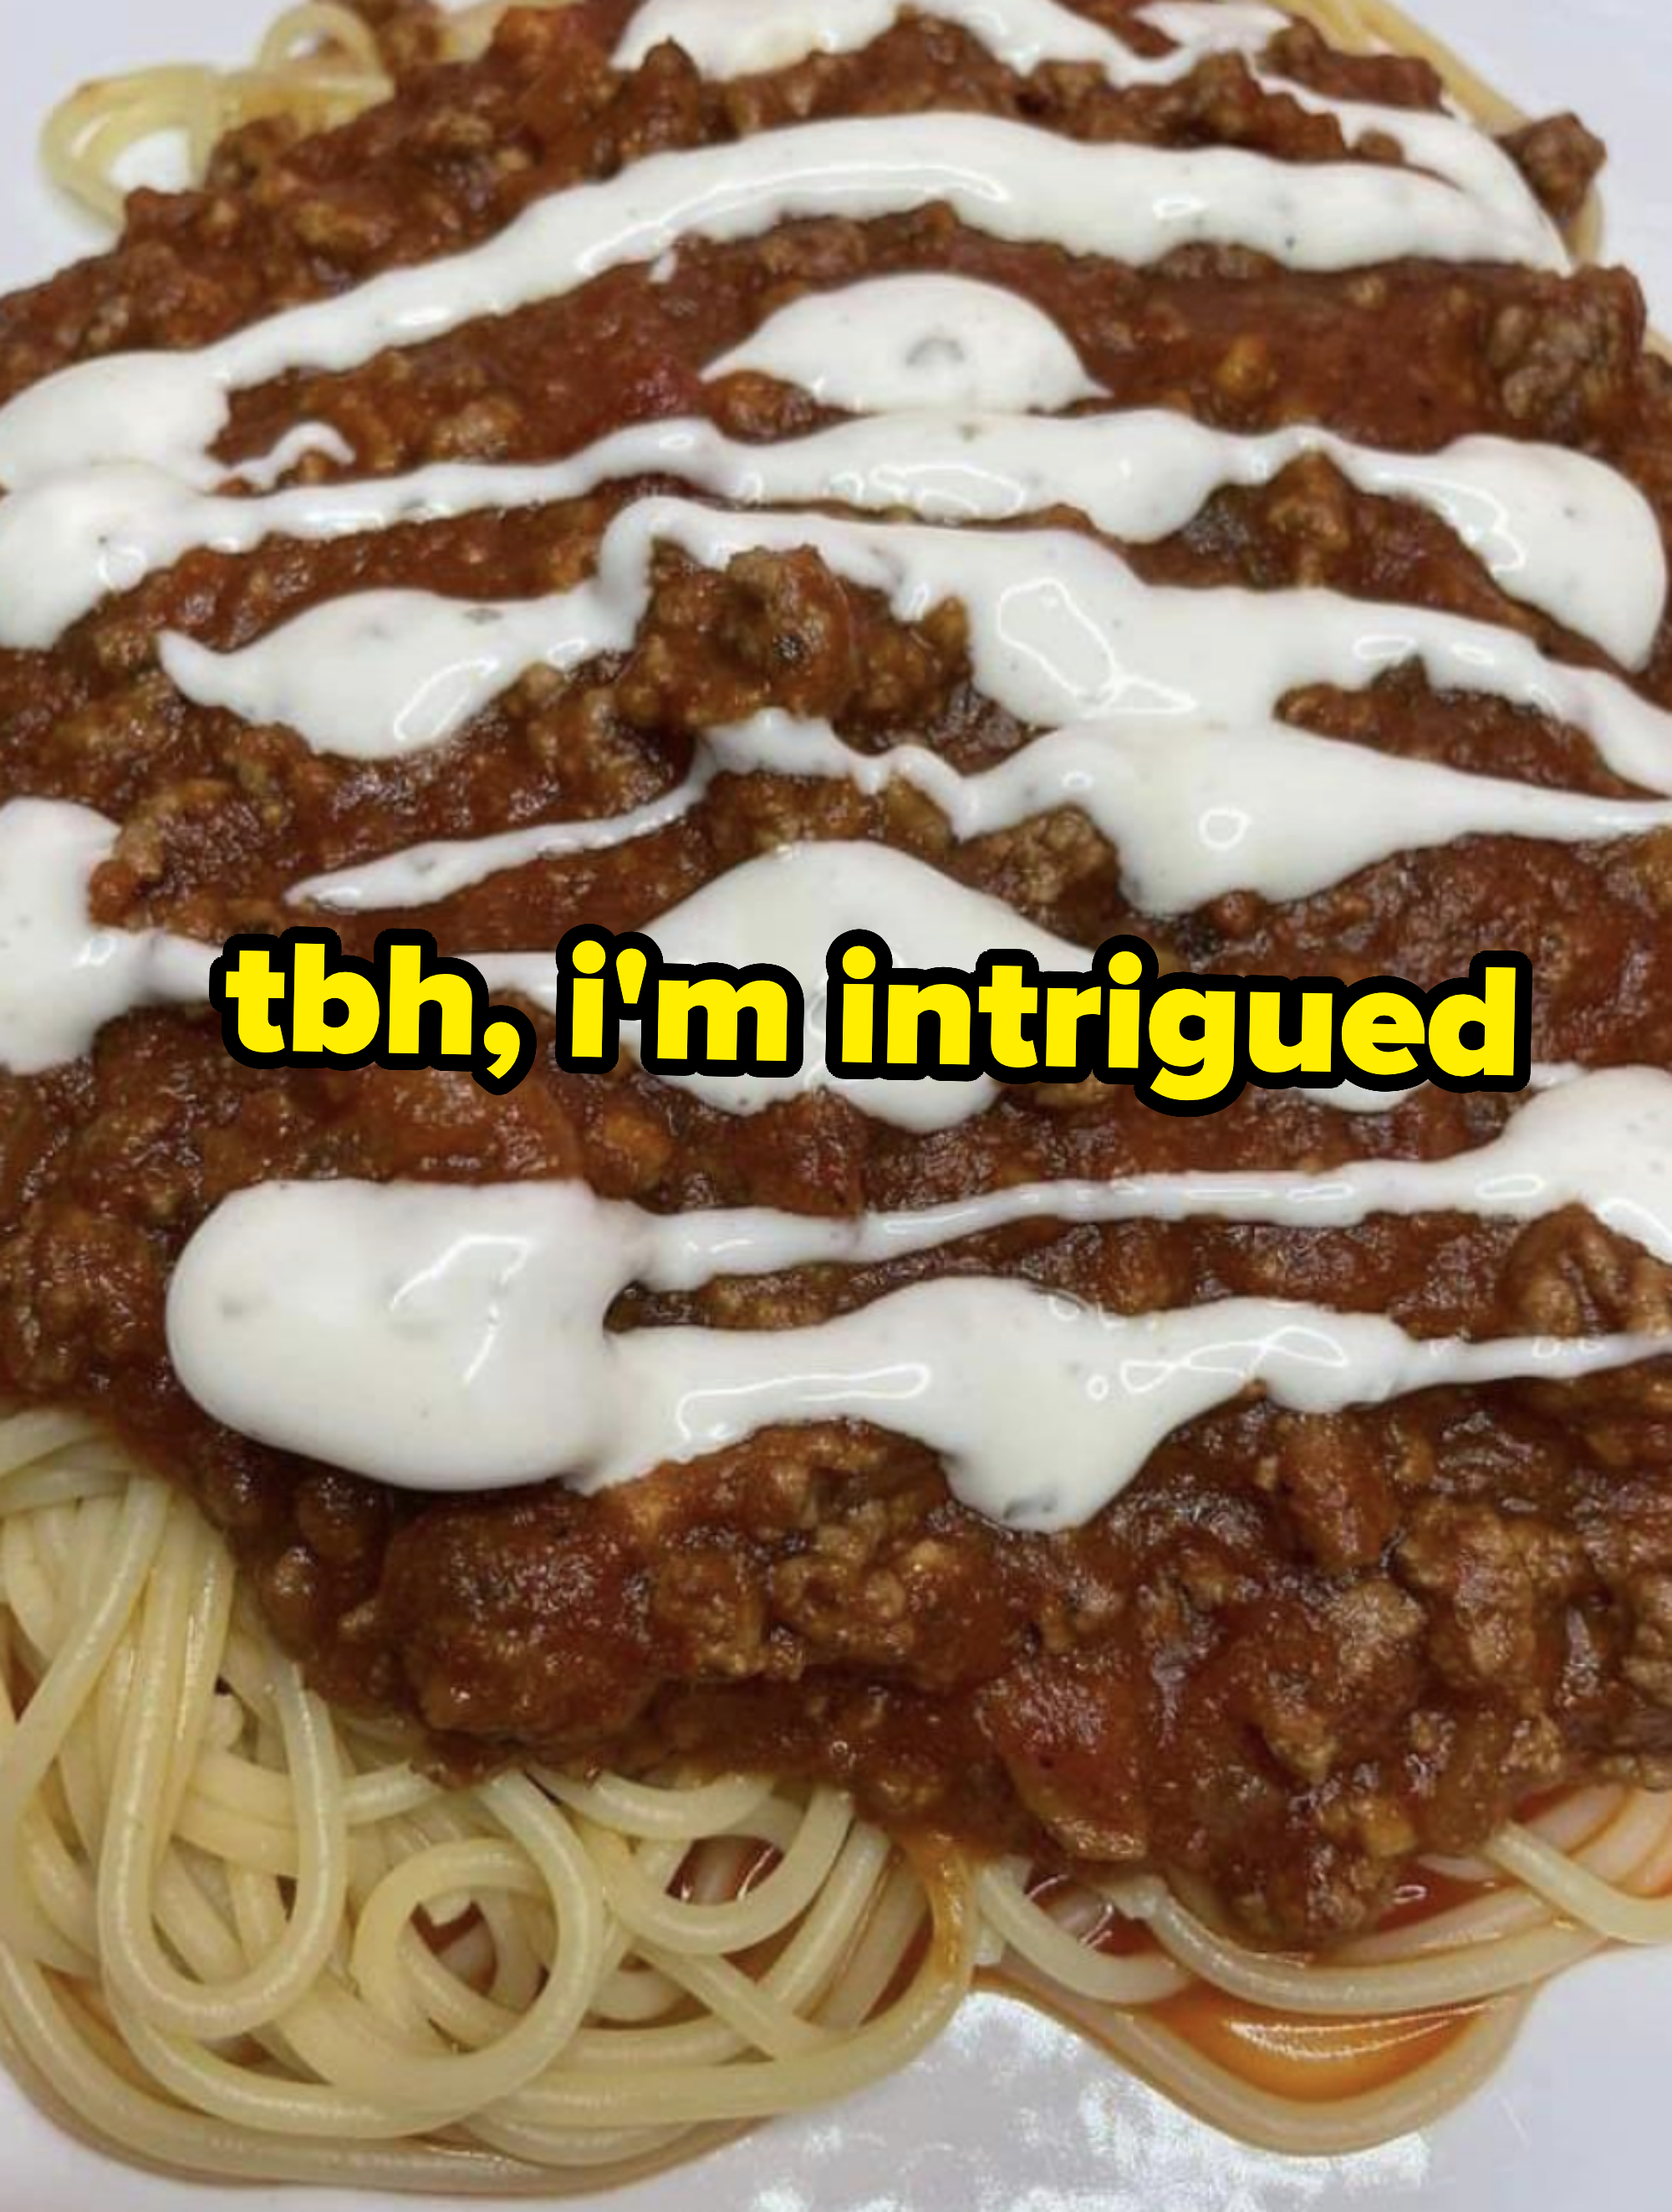 Plate of spaghetti with meat sauce and drizzled with cream on top